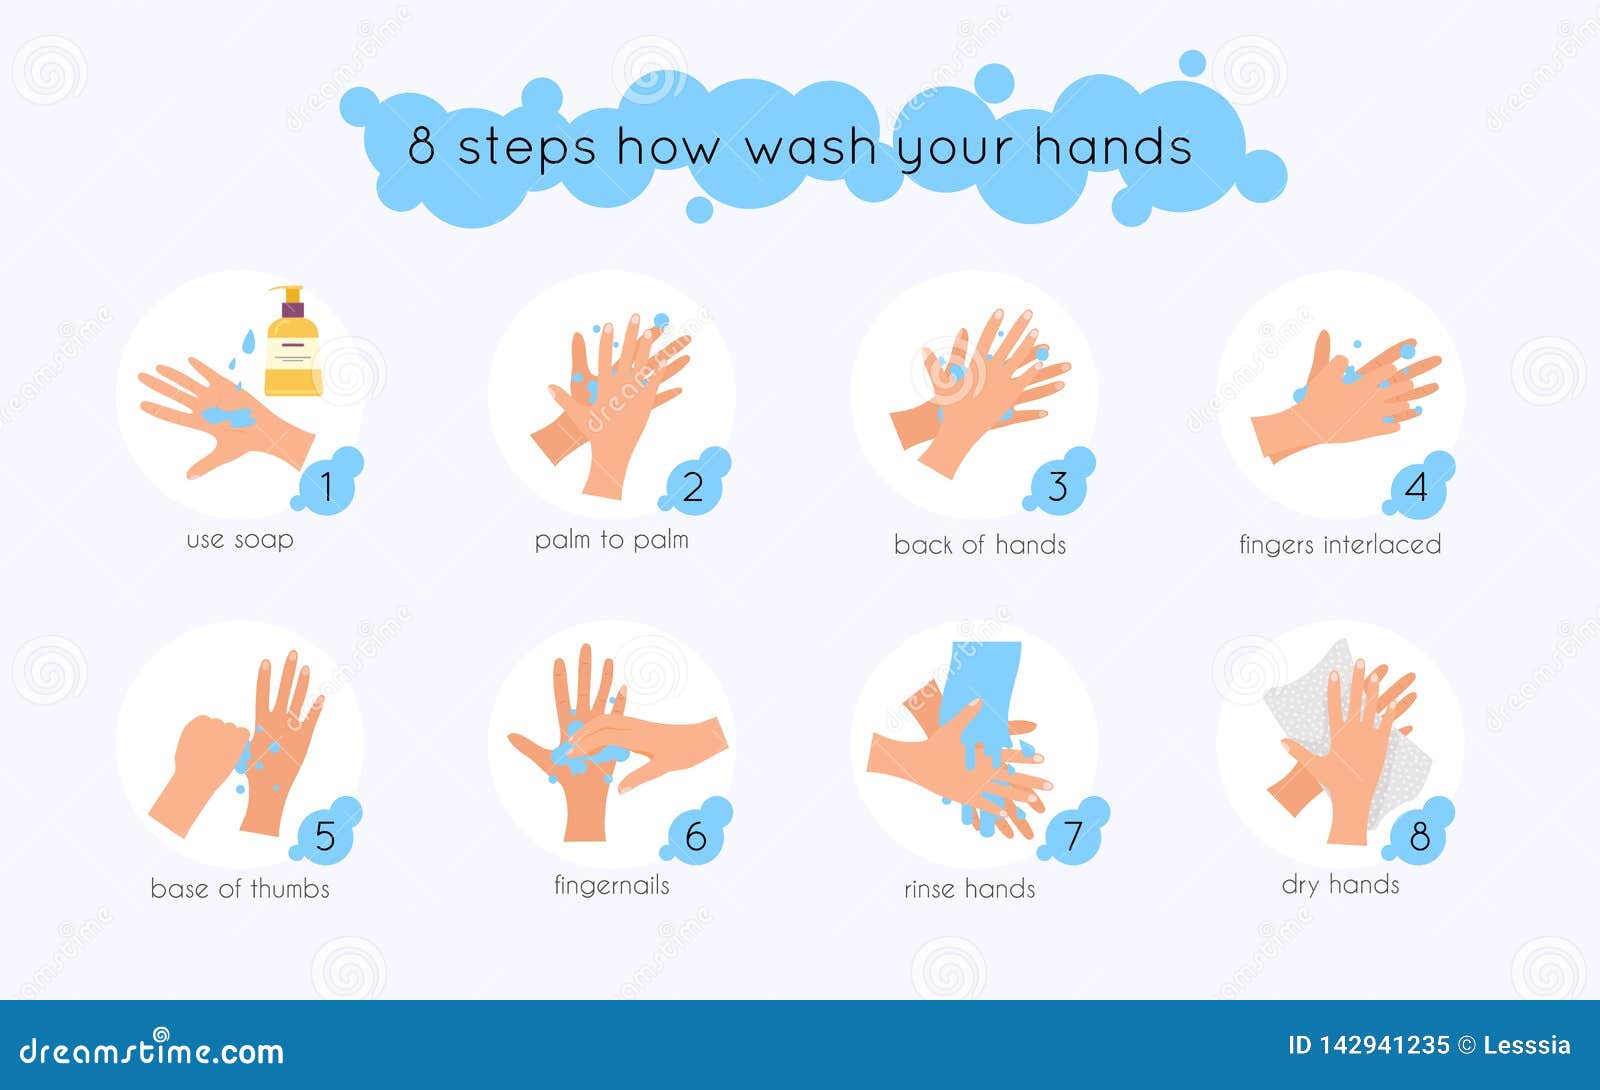 10-steps-to-wash-your-hands-properly-healthcare-illustrations